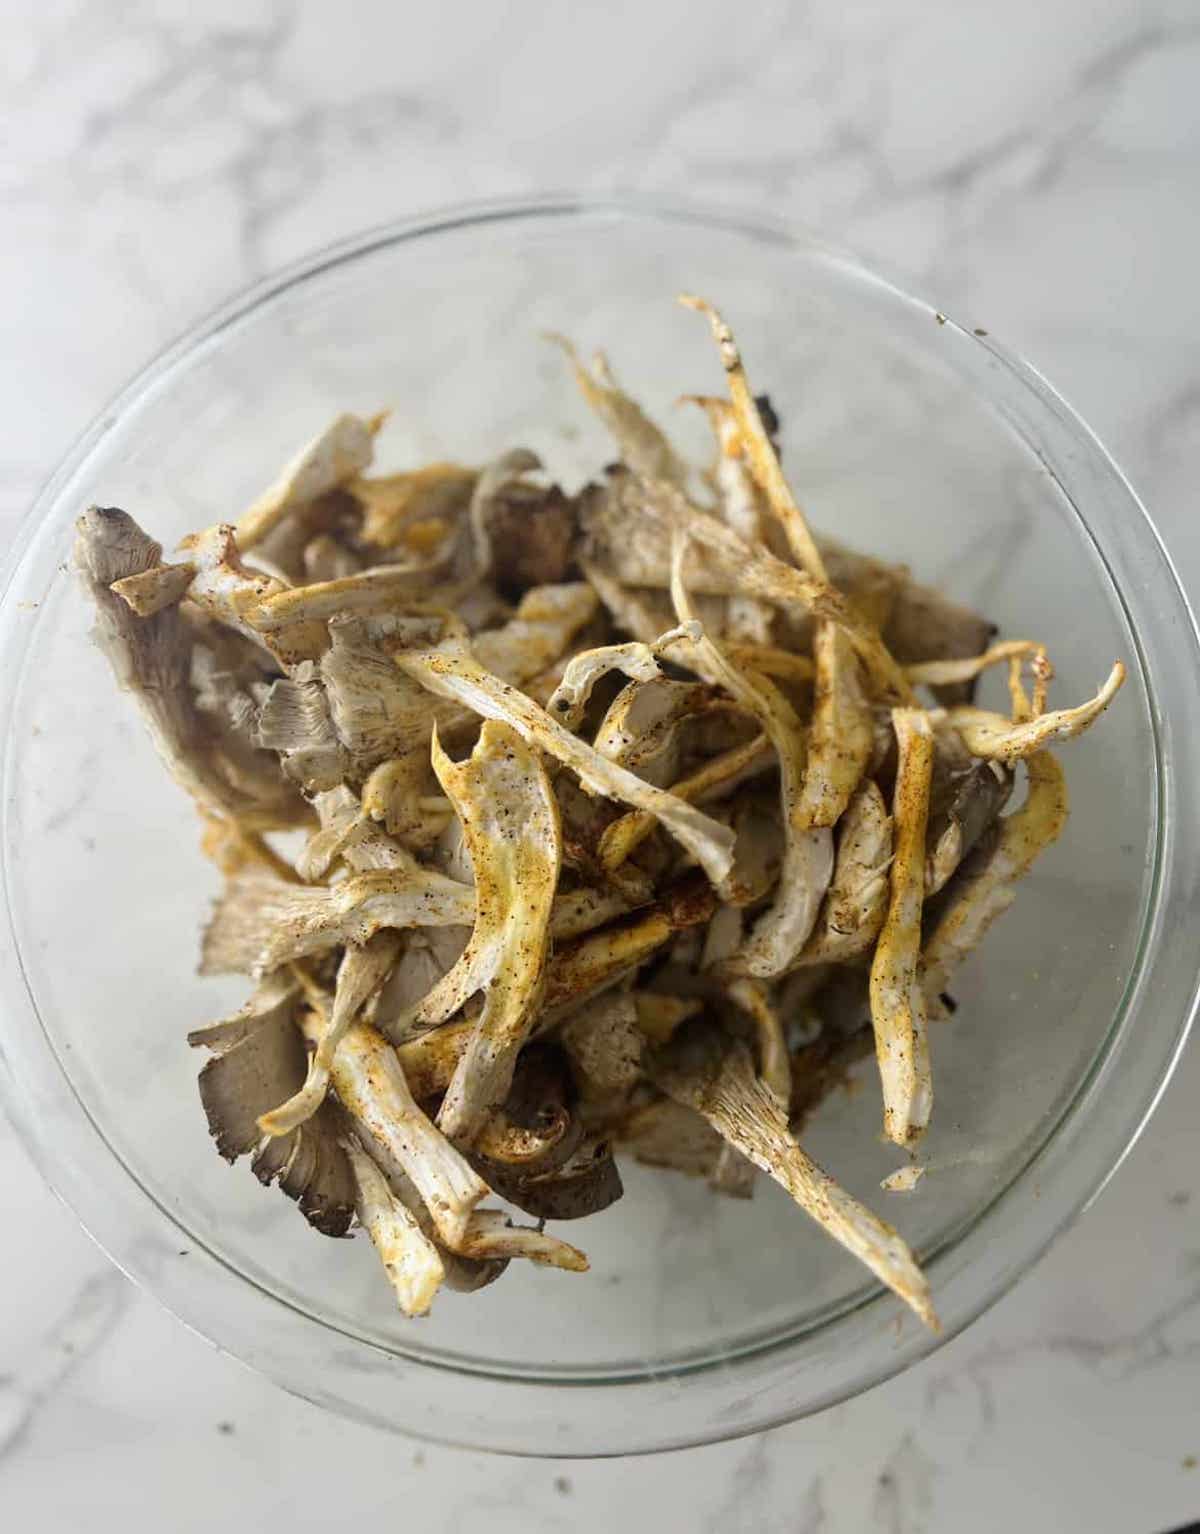 This is a photo of oyster mushrooms with marinade. 